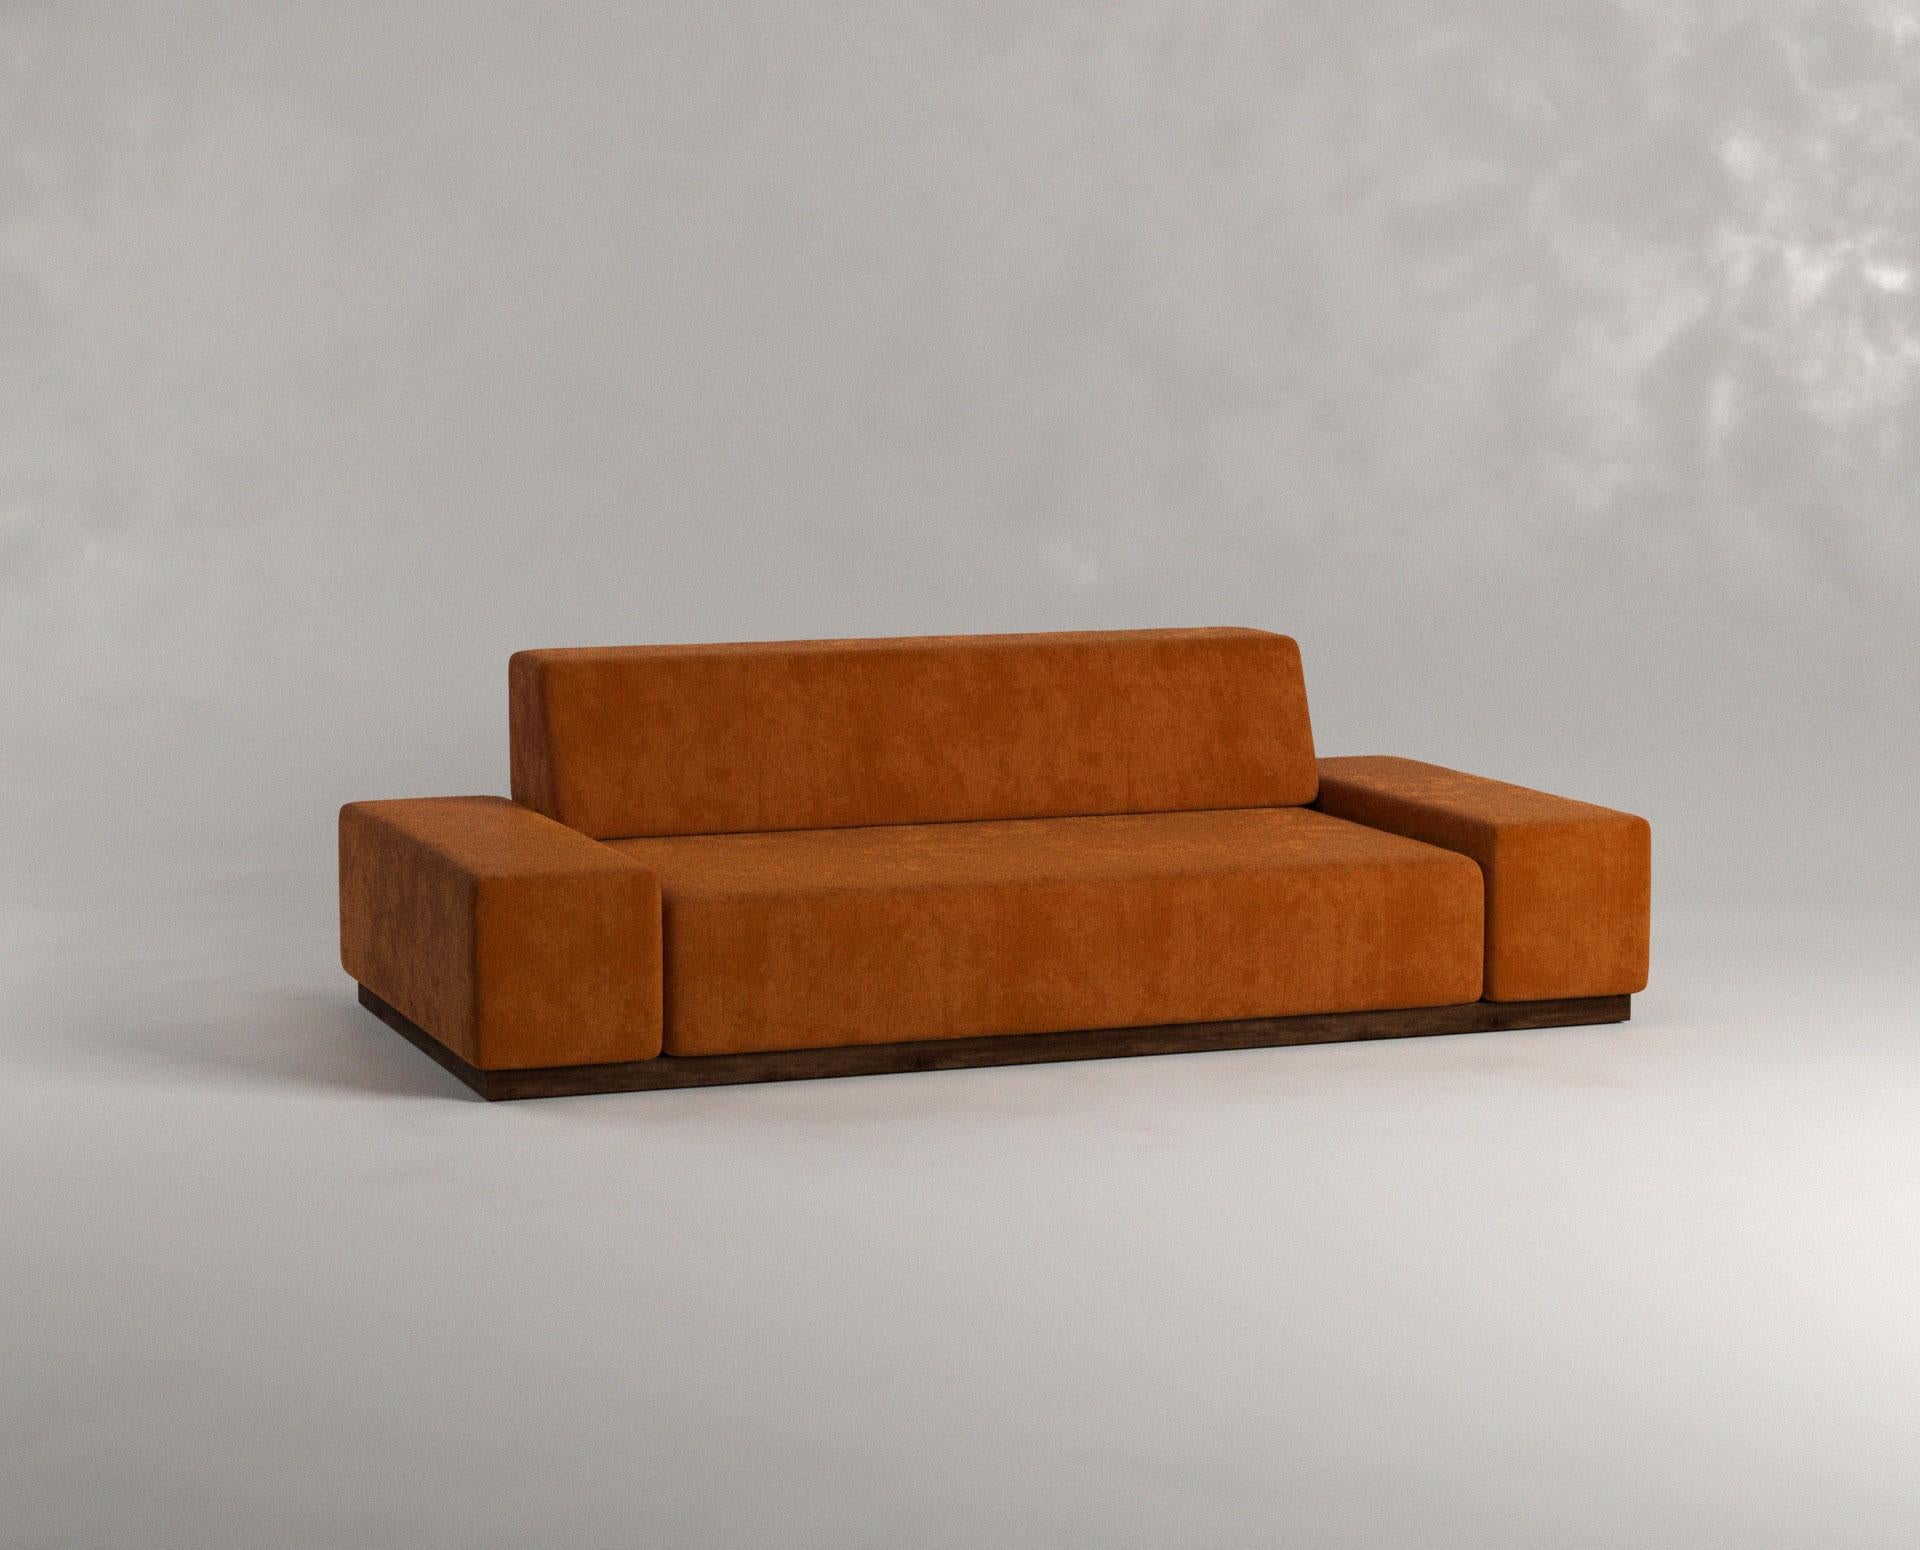 Nube sofa two seaters dune by Siete Studio
Dimensions: D200 x W100 x H60 cm.
Materials: Walnut, cushions, upholstery.

Characterised by its round edges and soft white cushions, Nube carries the comforting sensation of falling into a cloud.
The